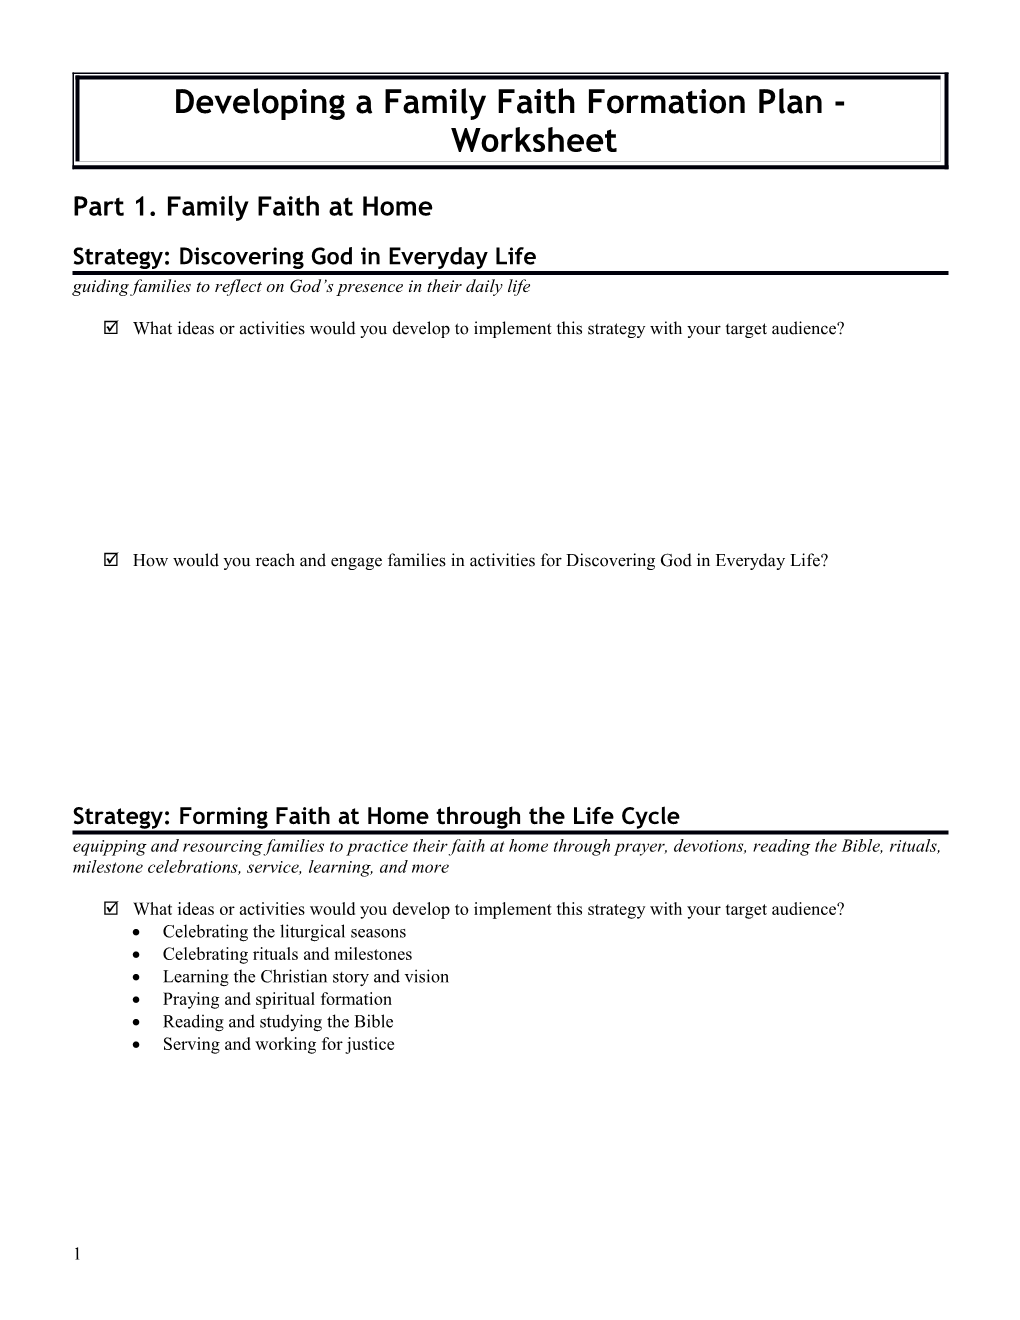 Developing Afamily Faith Formation Plan - Worksheet